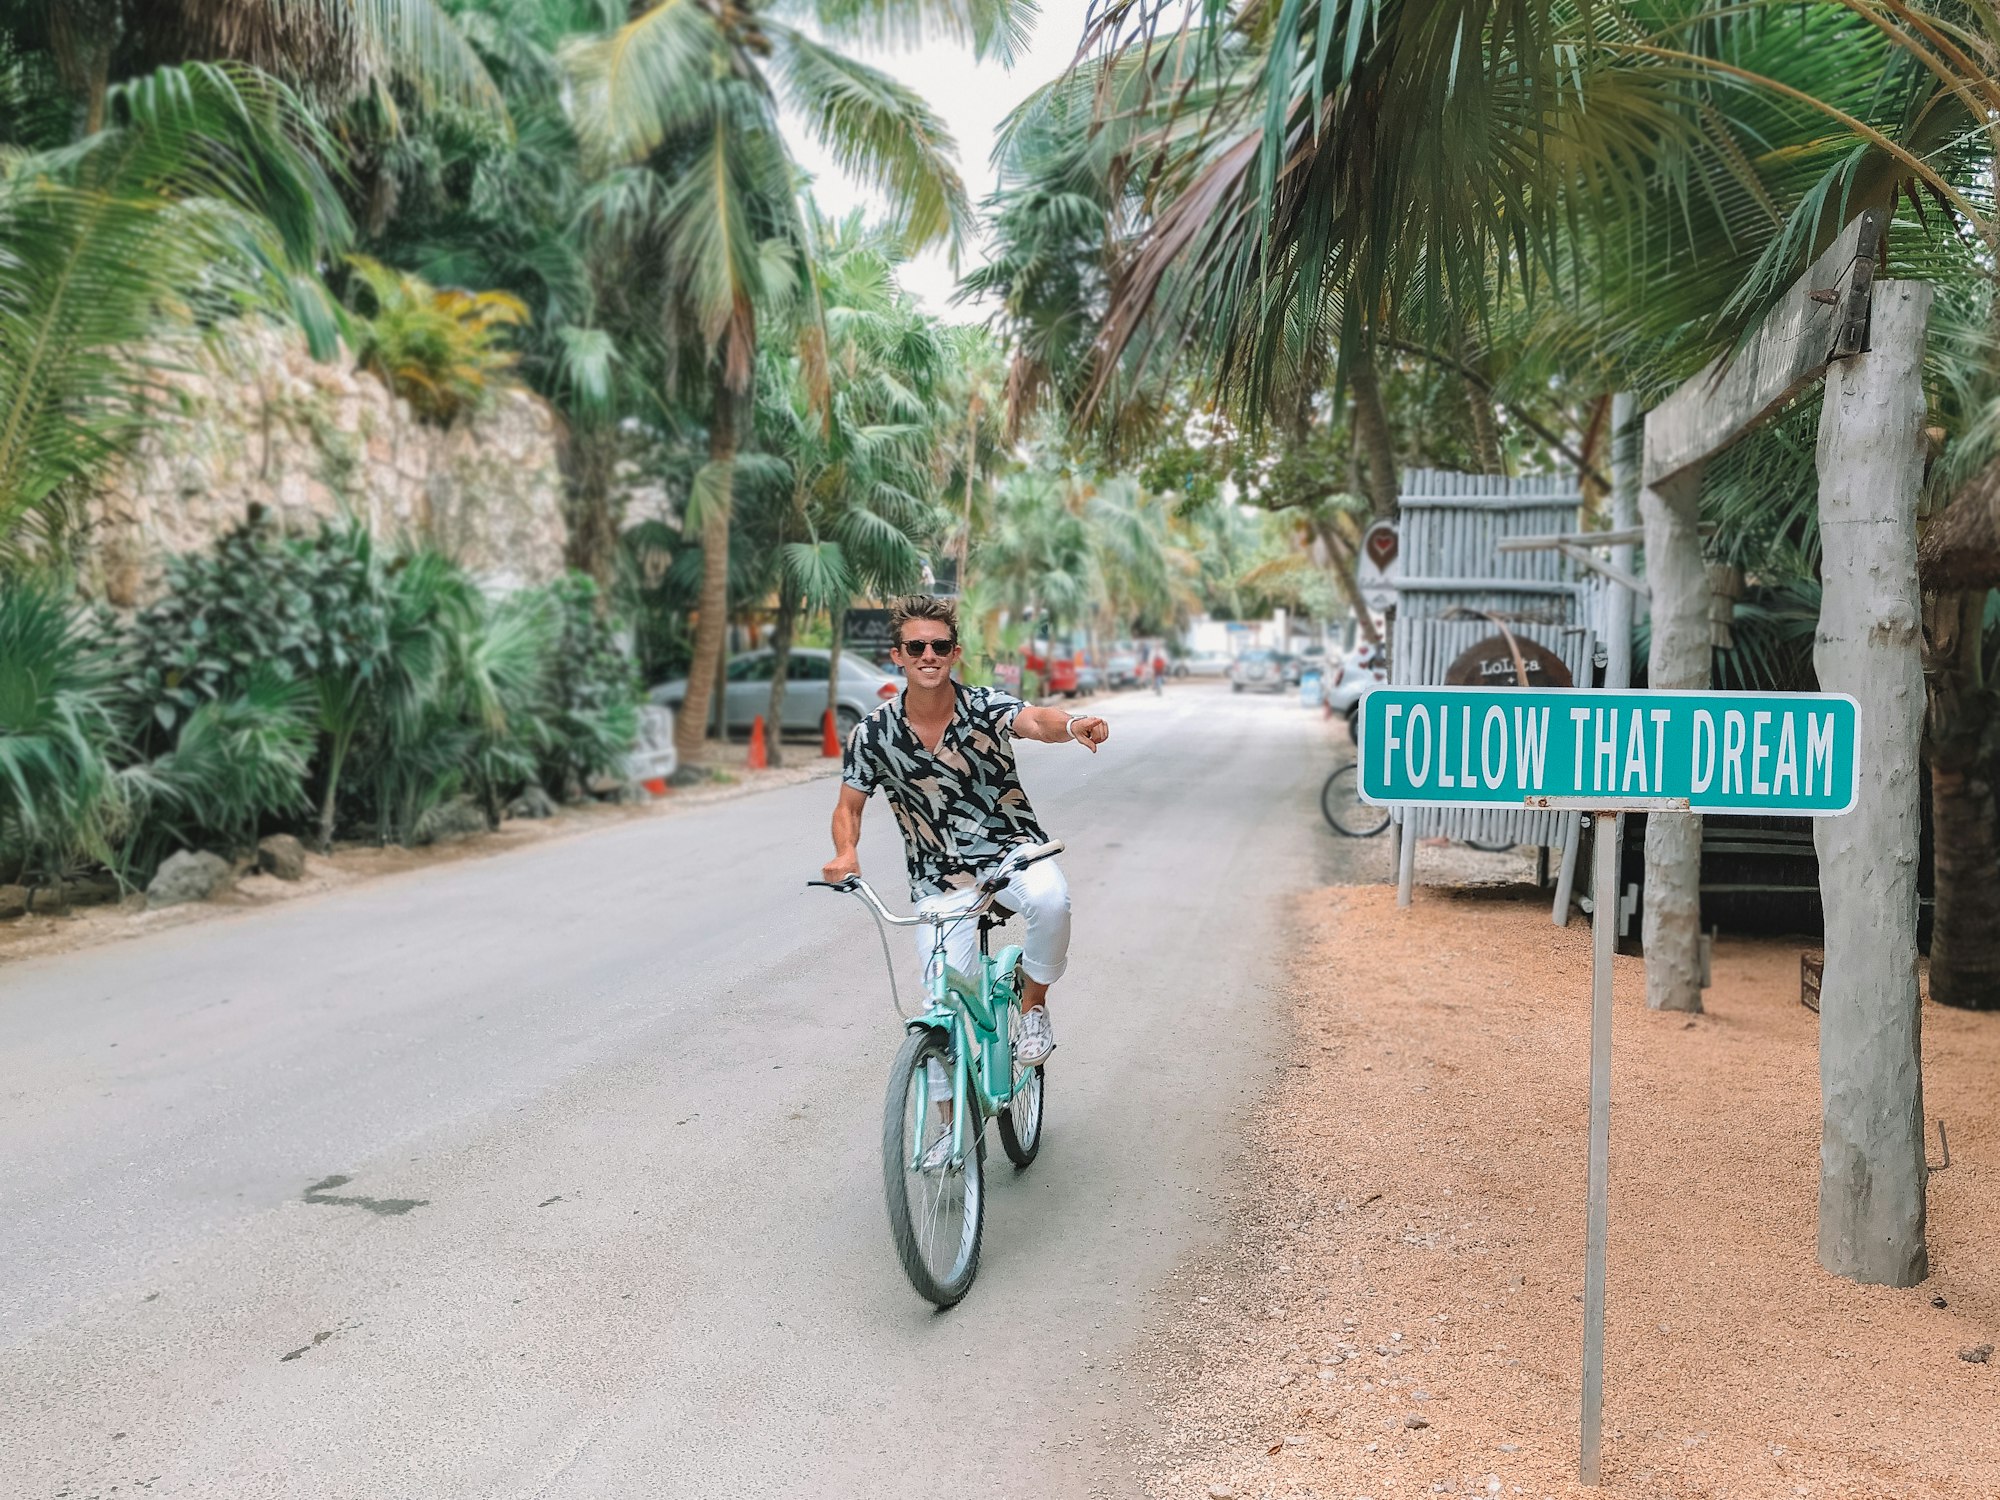 Entrepreneur Austin Distel bicycles in Tulum, Mexico past the Follow That Dream sign - just as many other digital nomads travel and blog about their island adventures.

Model: @Austindistel
https://www.instagram.com/austindistel/

Photographer: @breeandstephen
https://www.instagram.com/breeandstephen/

.